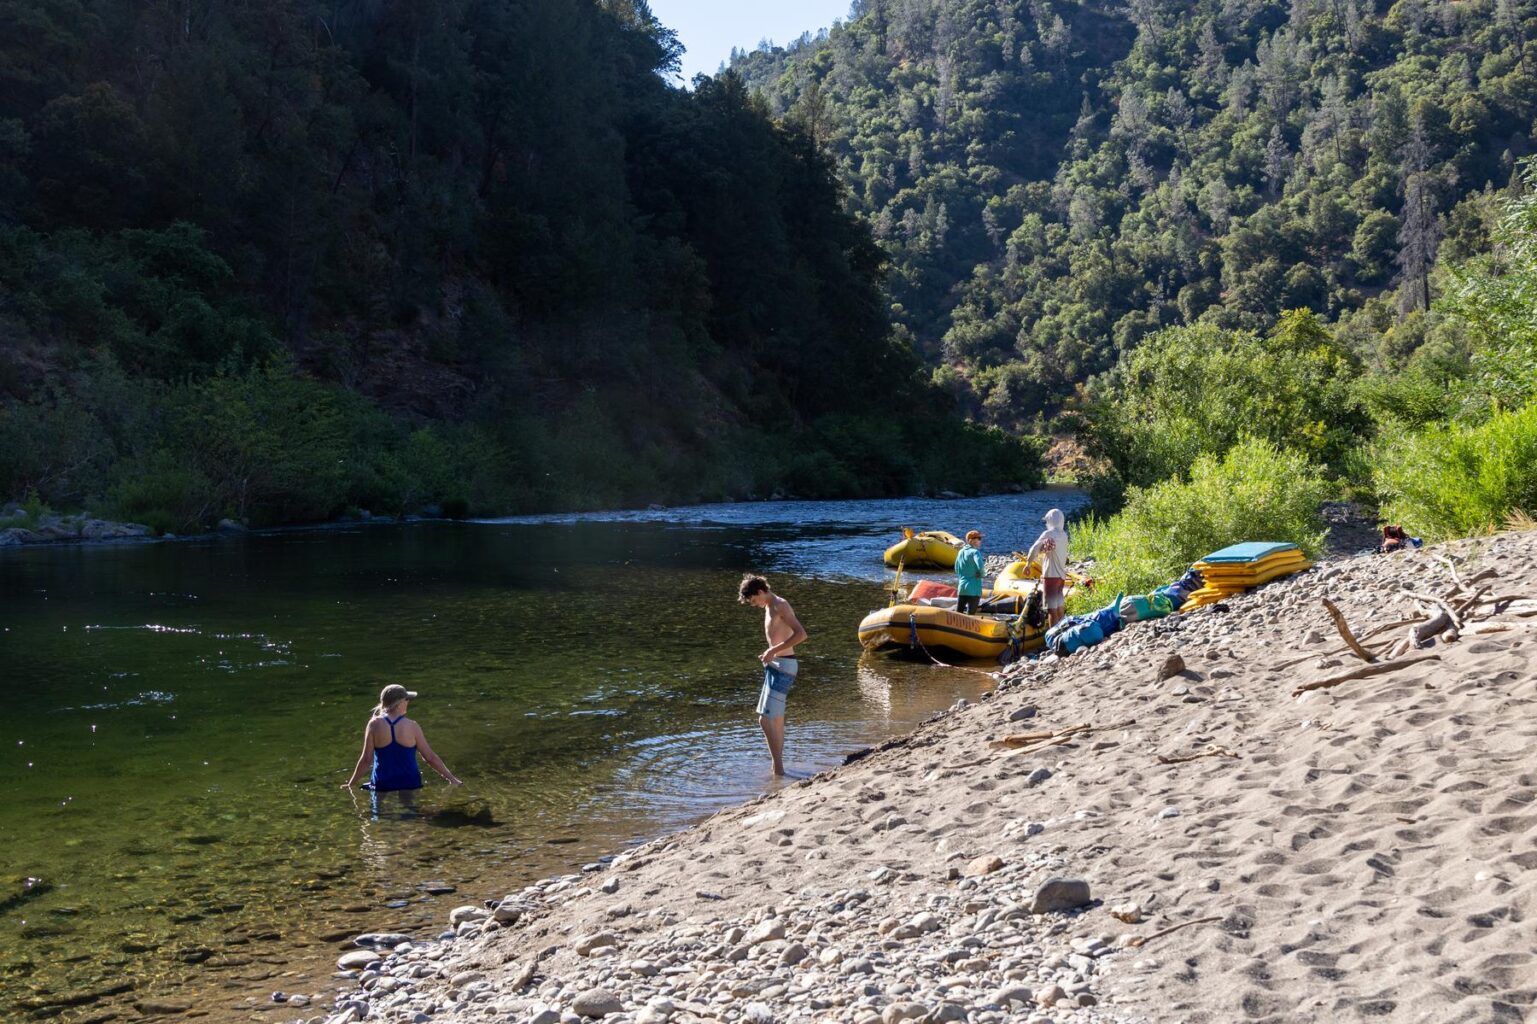 Relaxing at camp during an OARS Two-Day Middle Fork American River trip